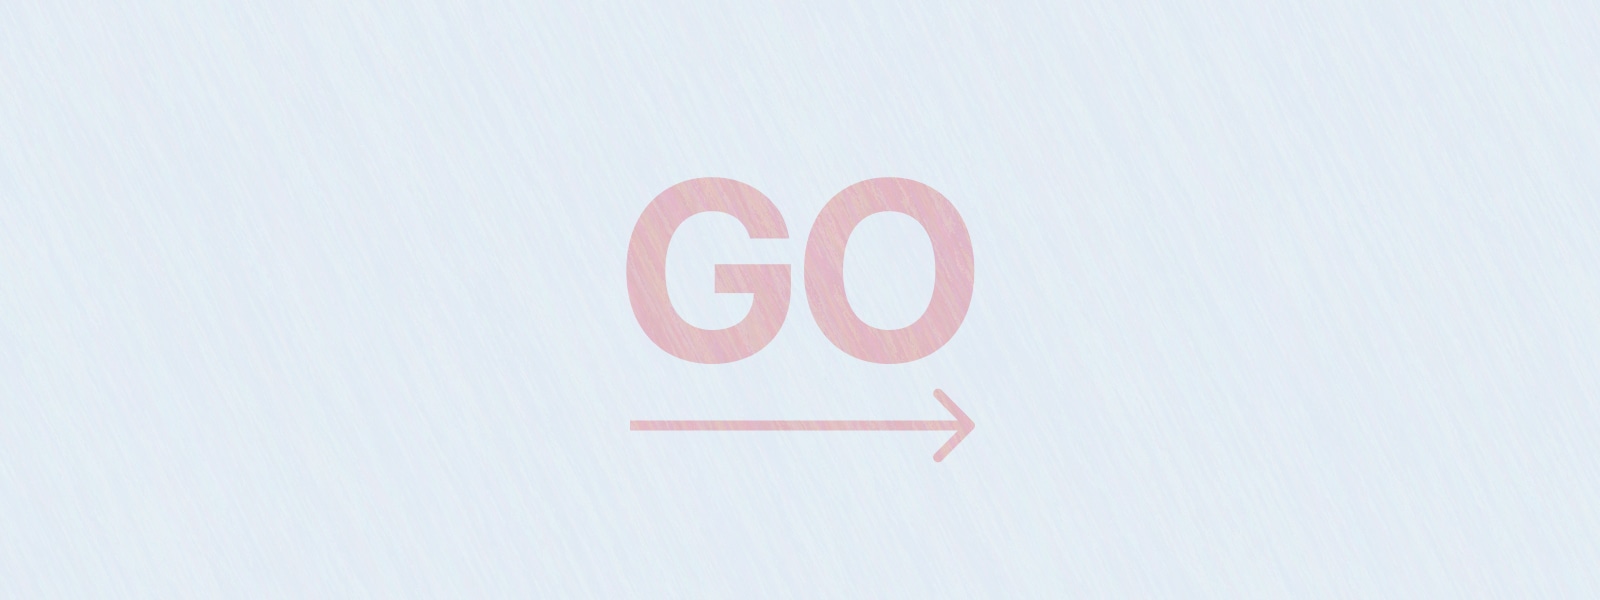 The word 'GO' with an arrow pointing right underneath